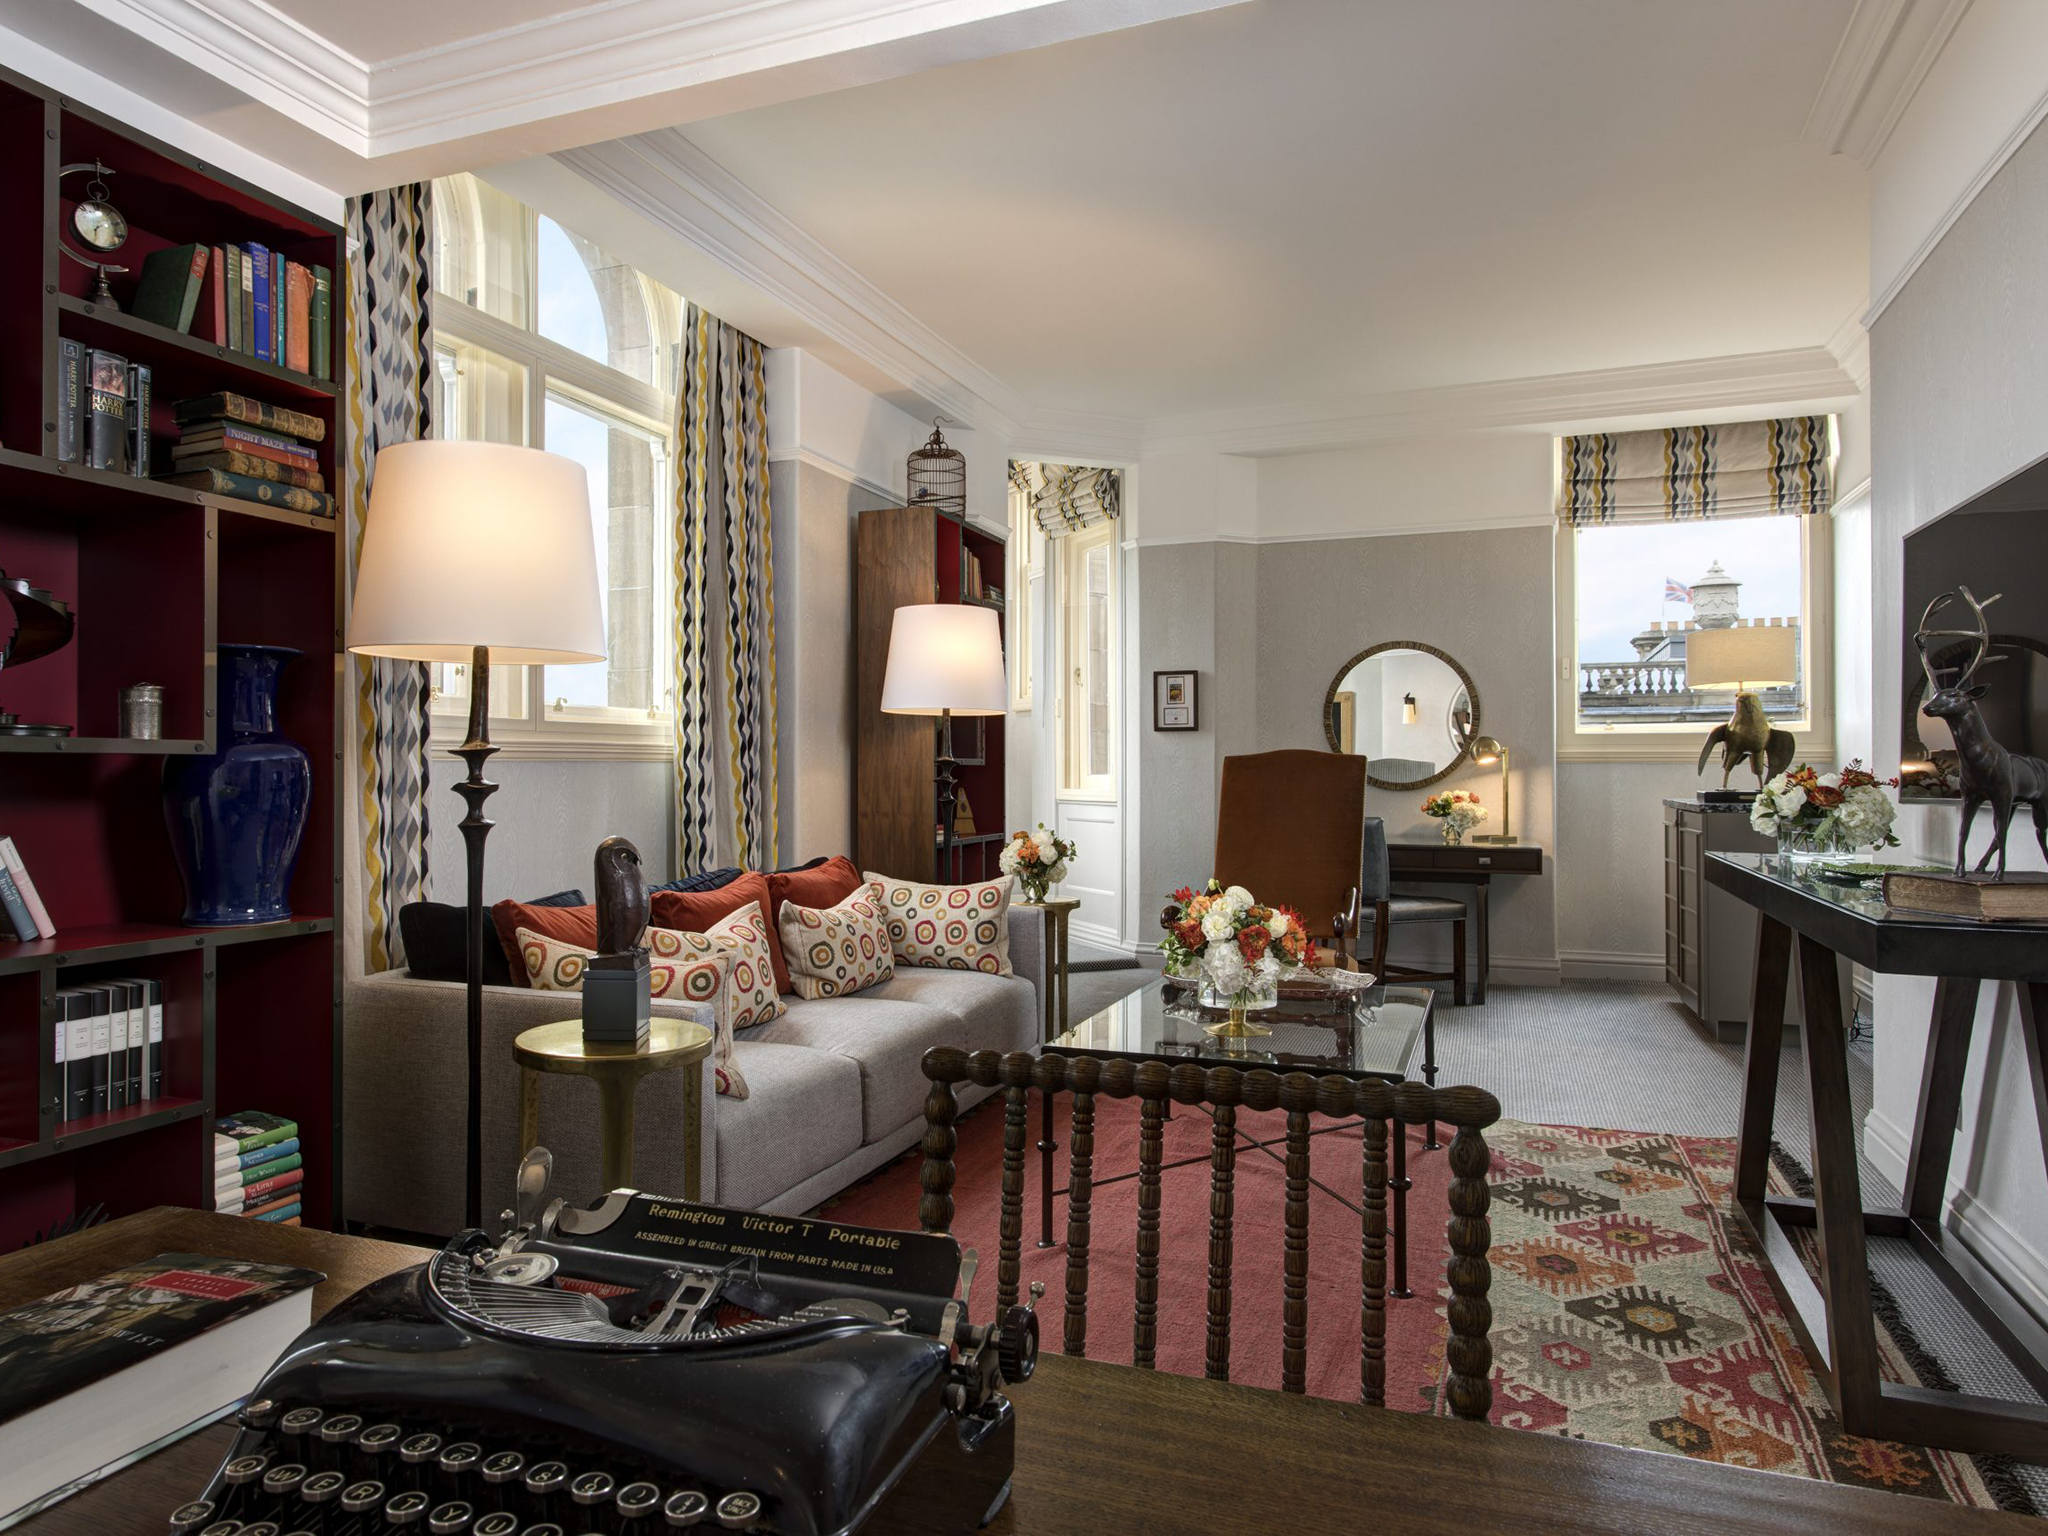 The Balmoral hotel has a JK Rowling room where the author completed her Harry Potter saga